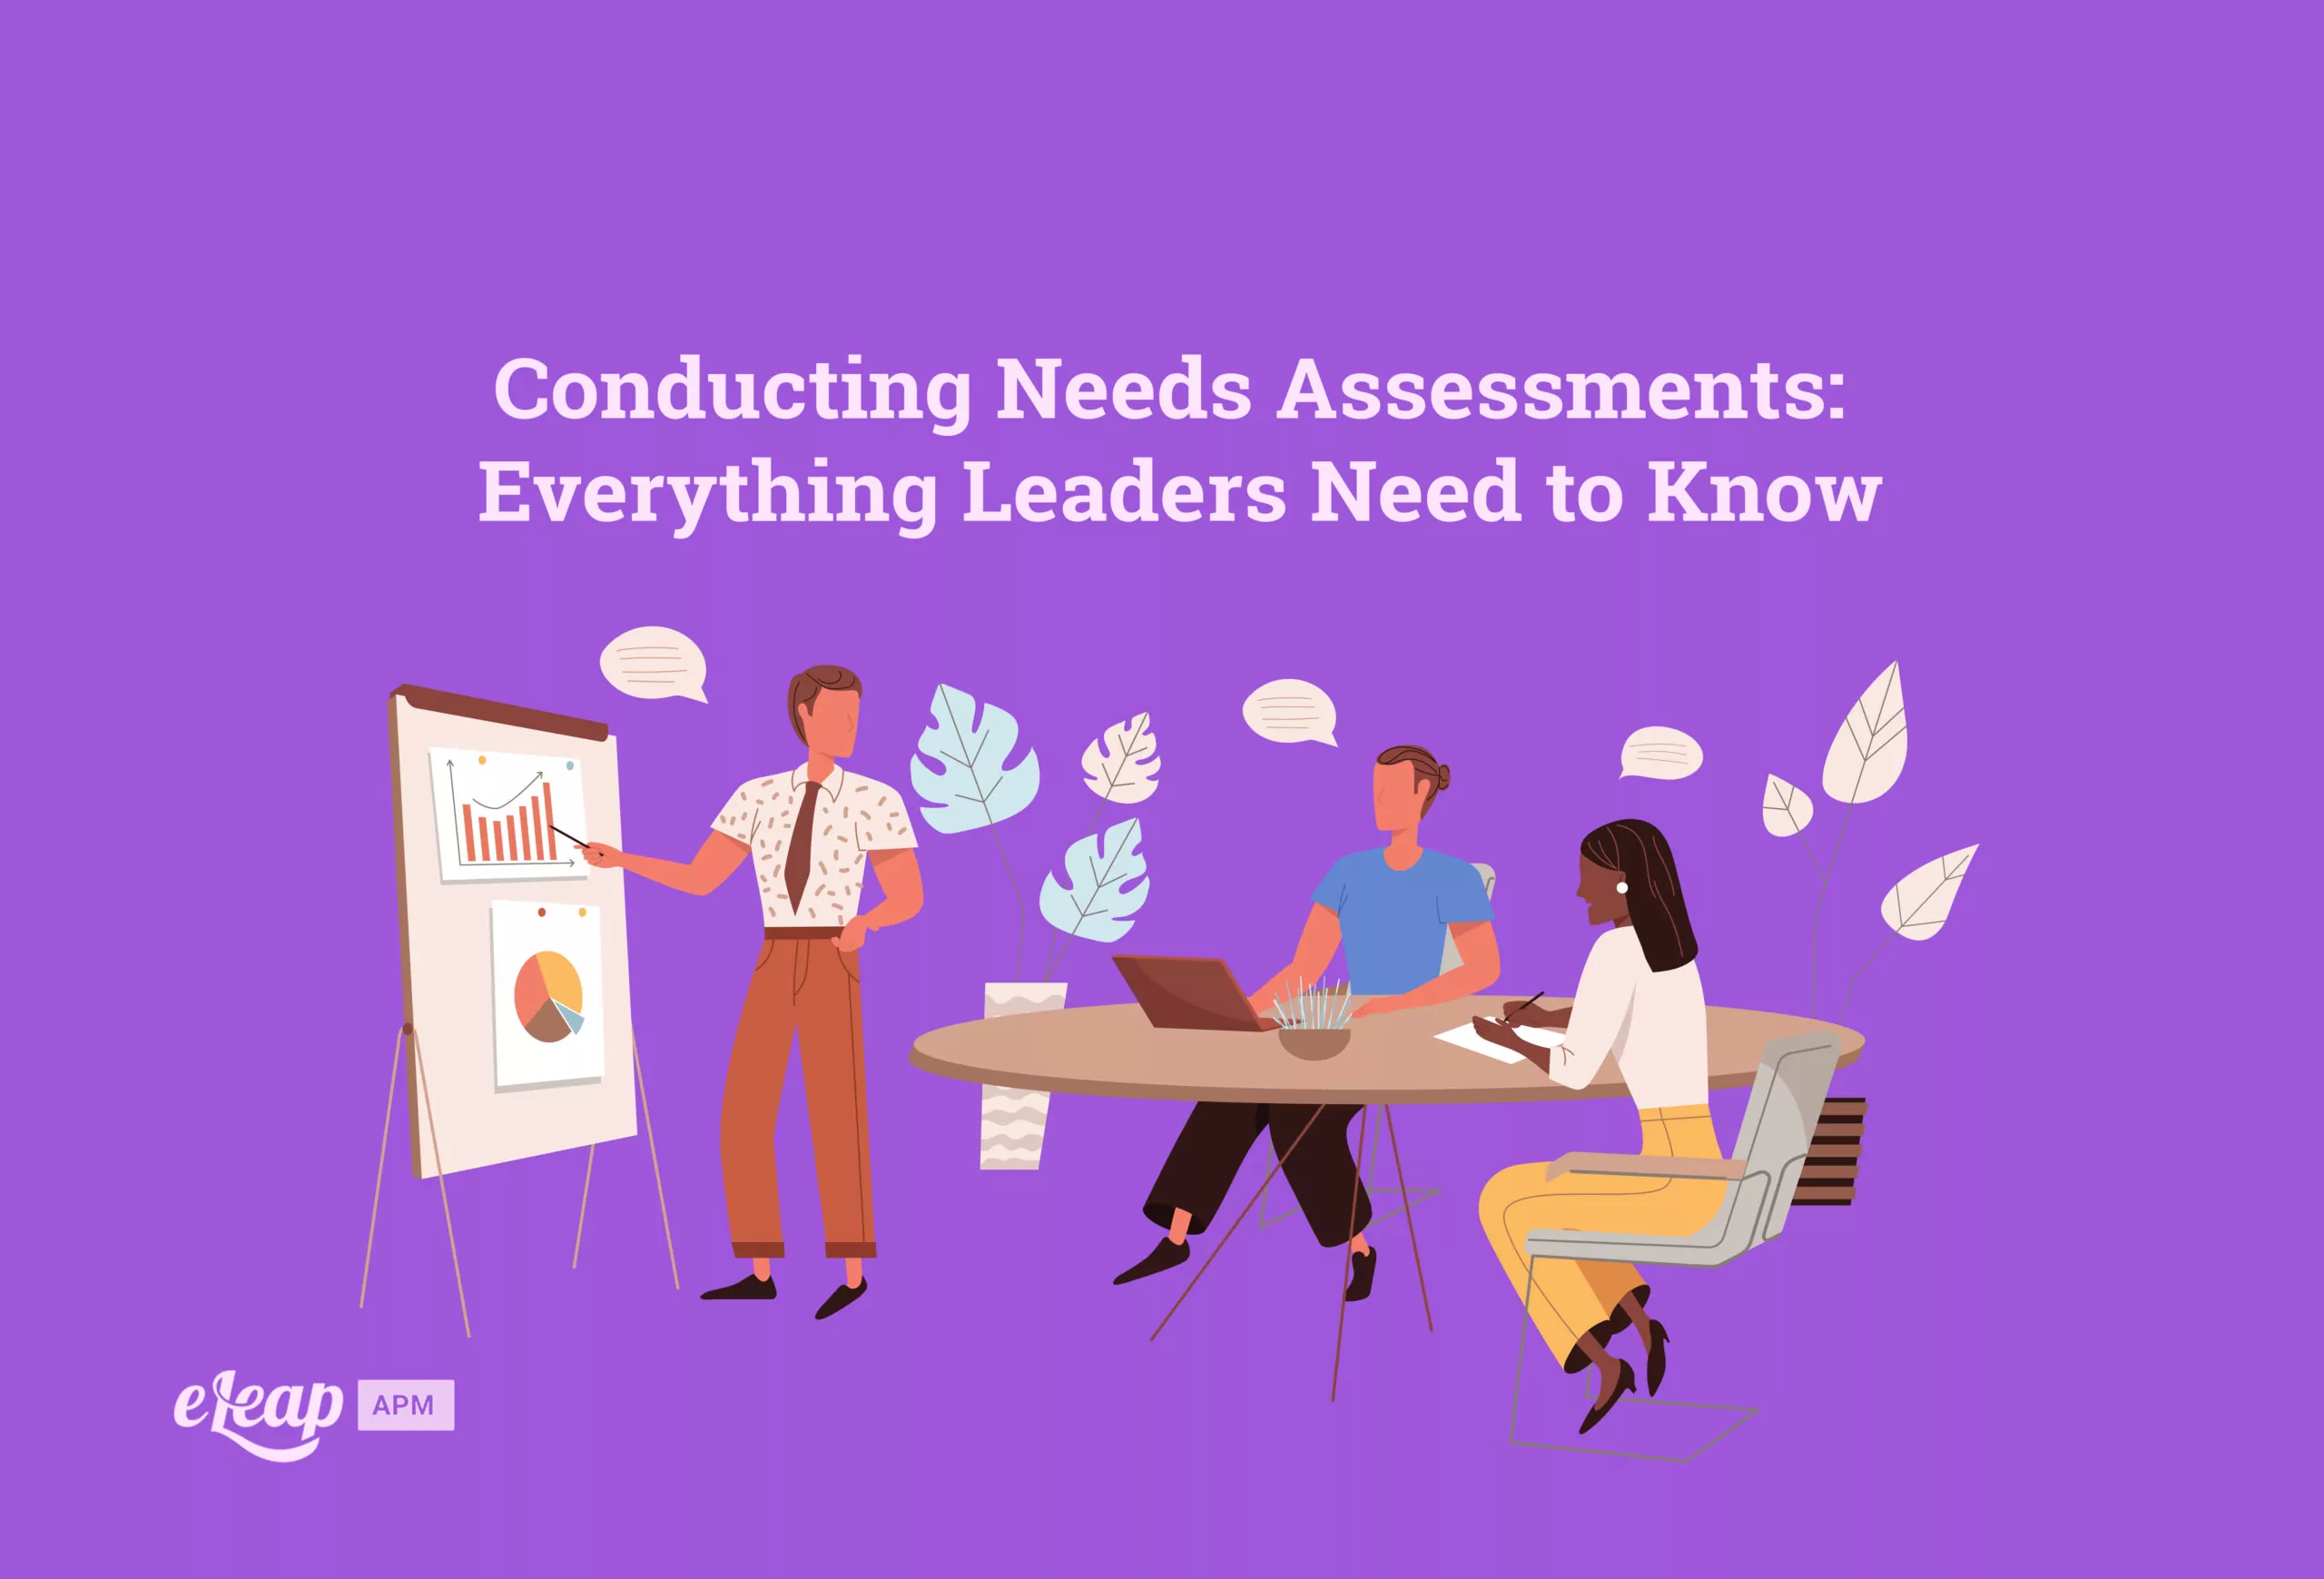 Conducting Needs Assessments: Everything Leaders Need to Know